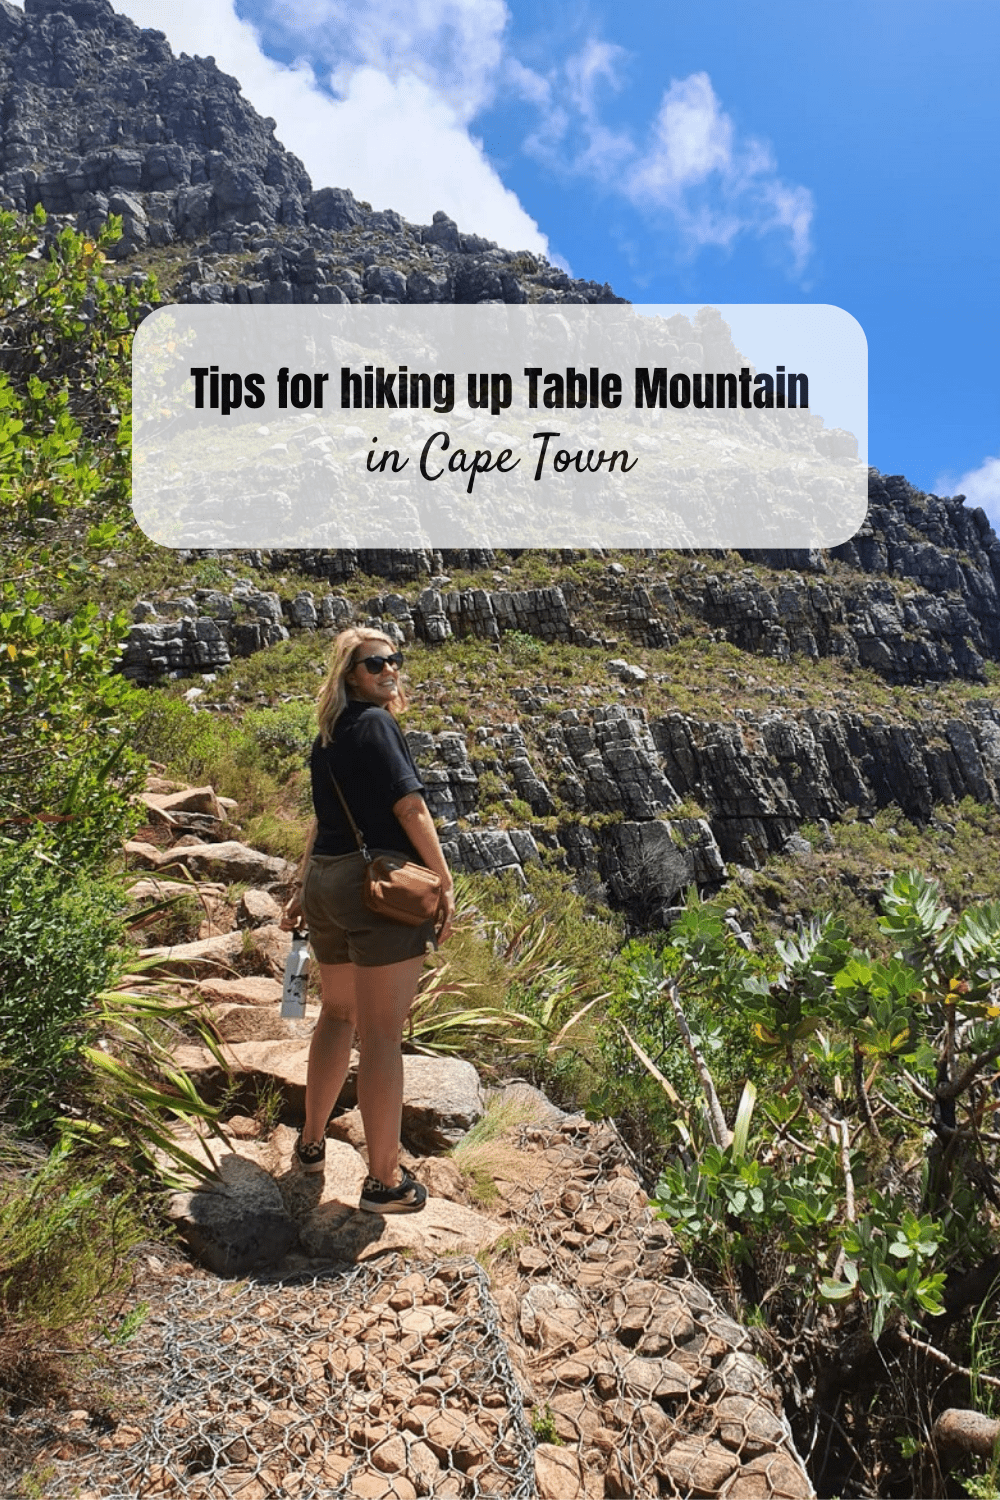 Tips for hiking up Table Mountain